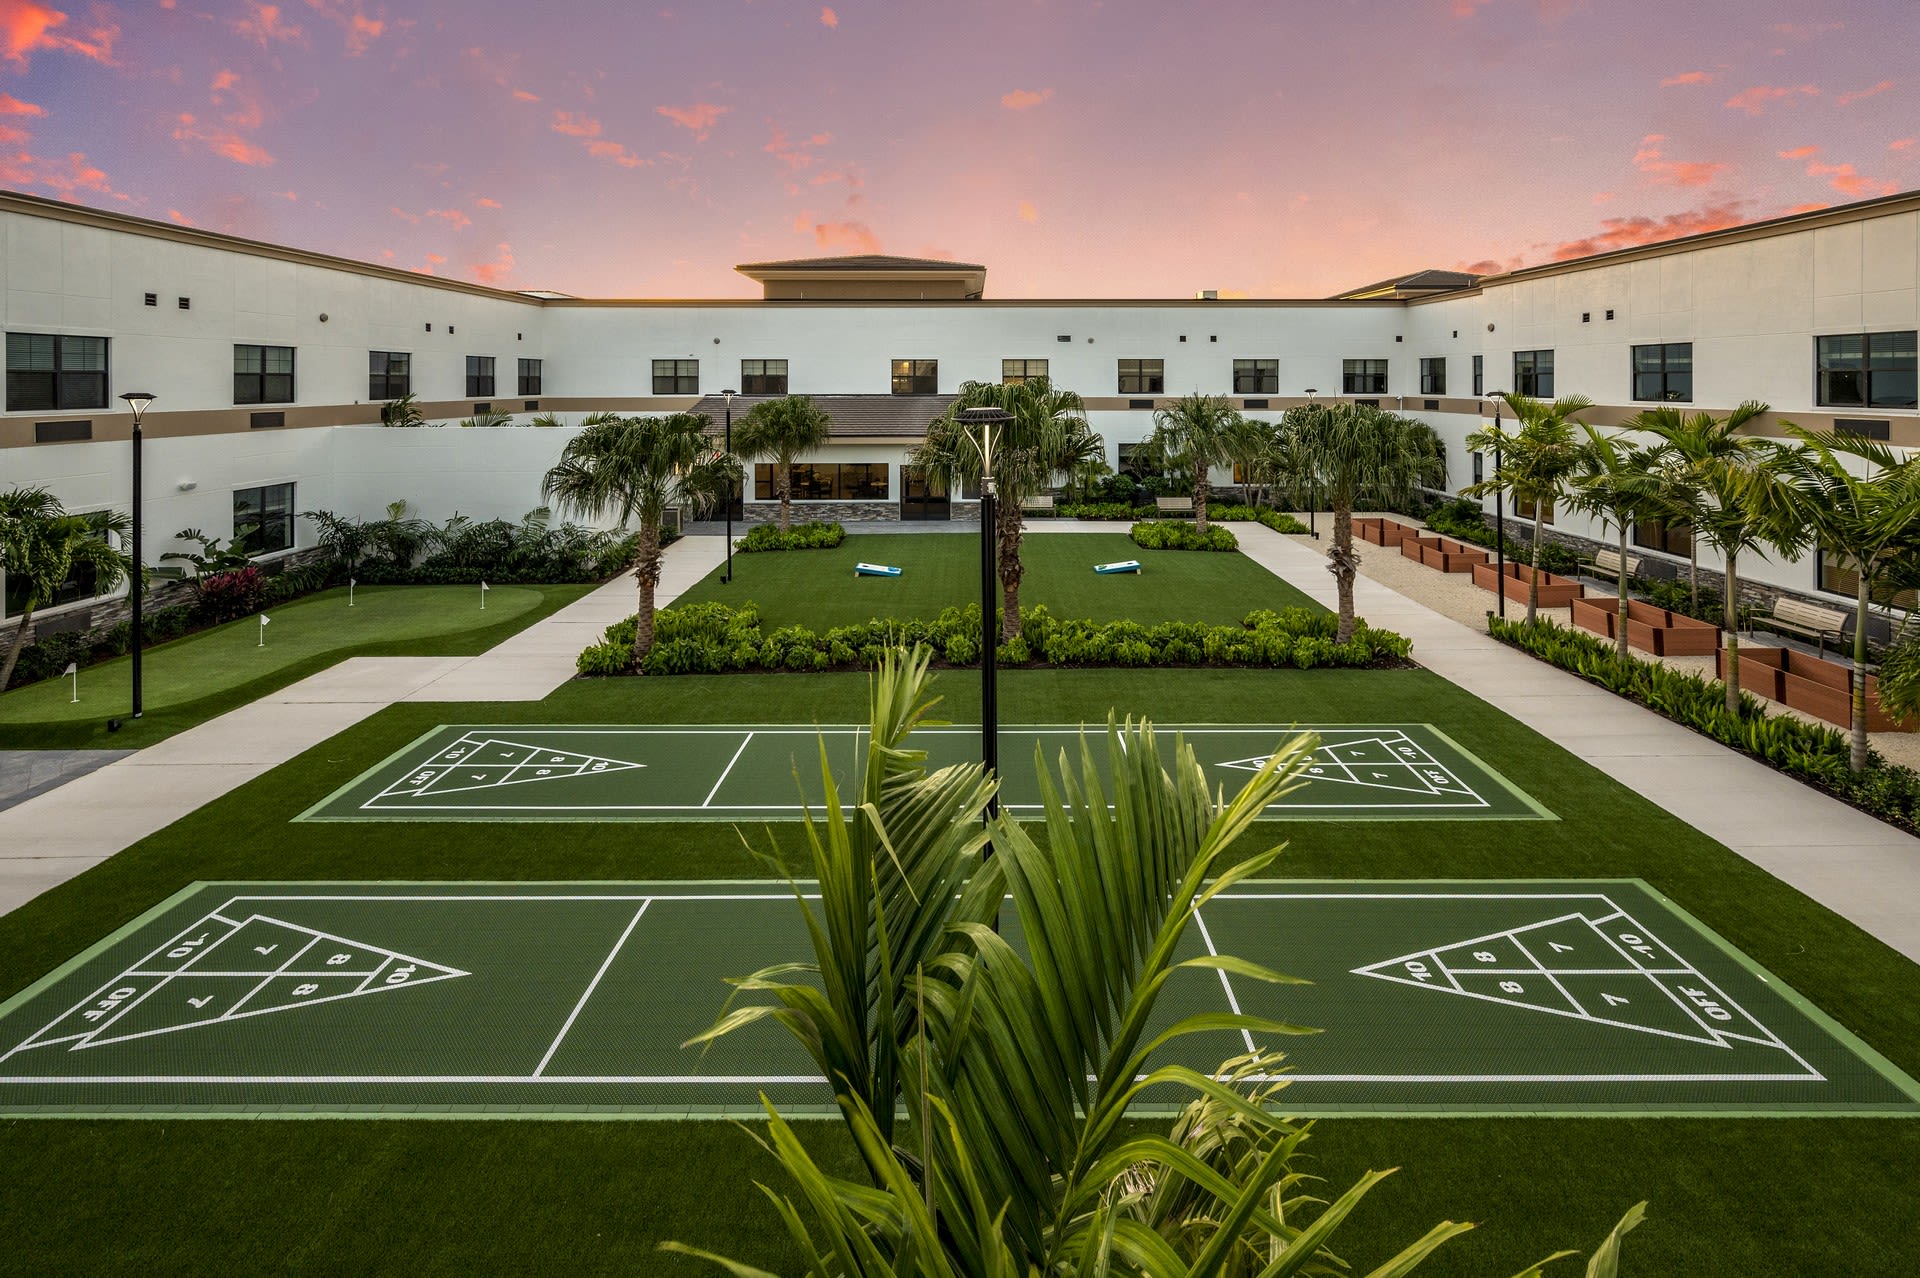 See what other amenities we offer at Inspired Living Royal Palm Beach in Royal Palm Beach, Florida